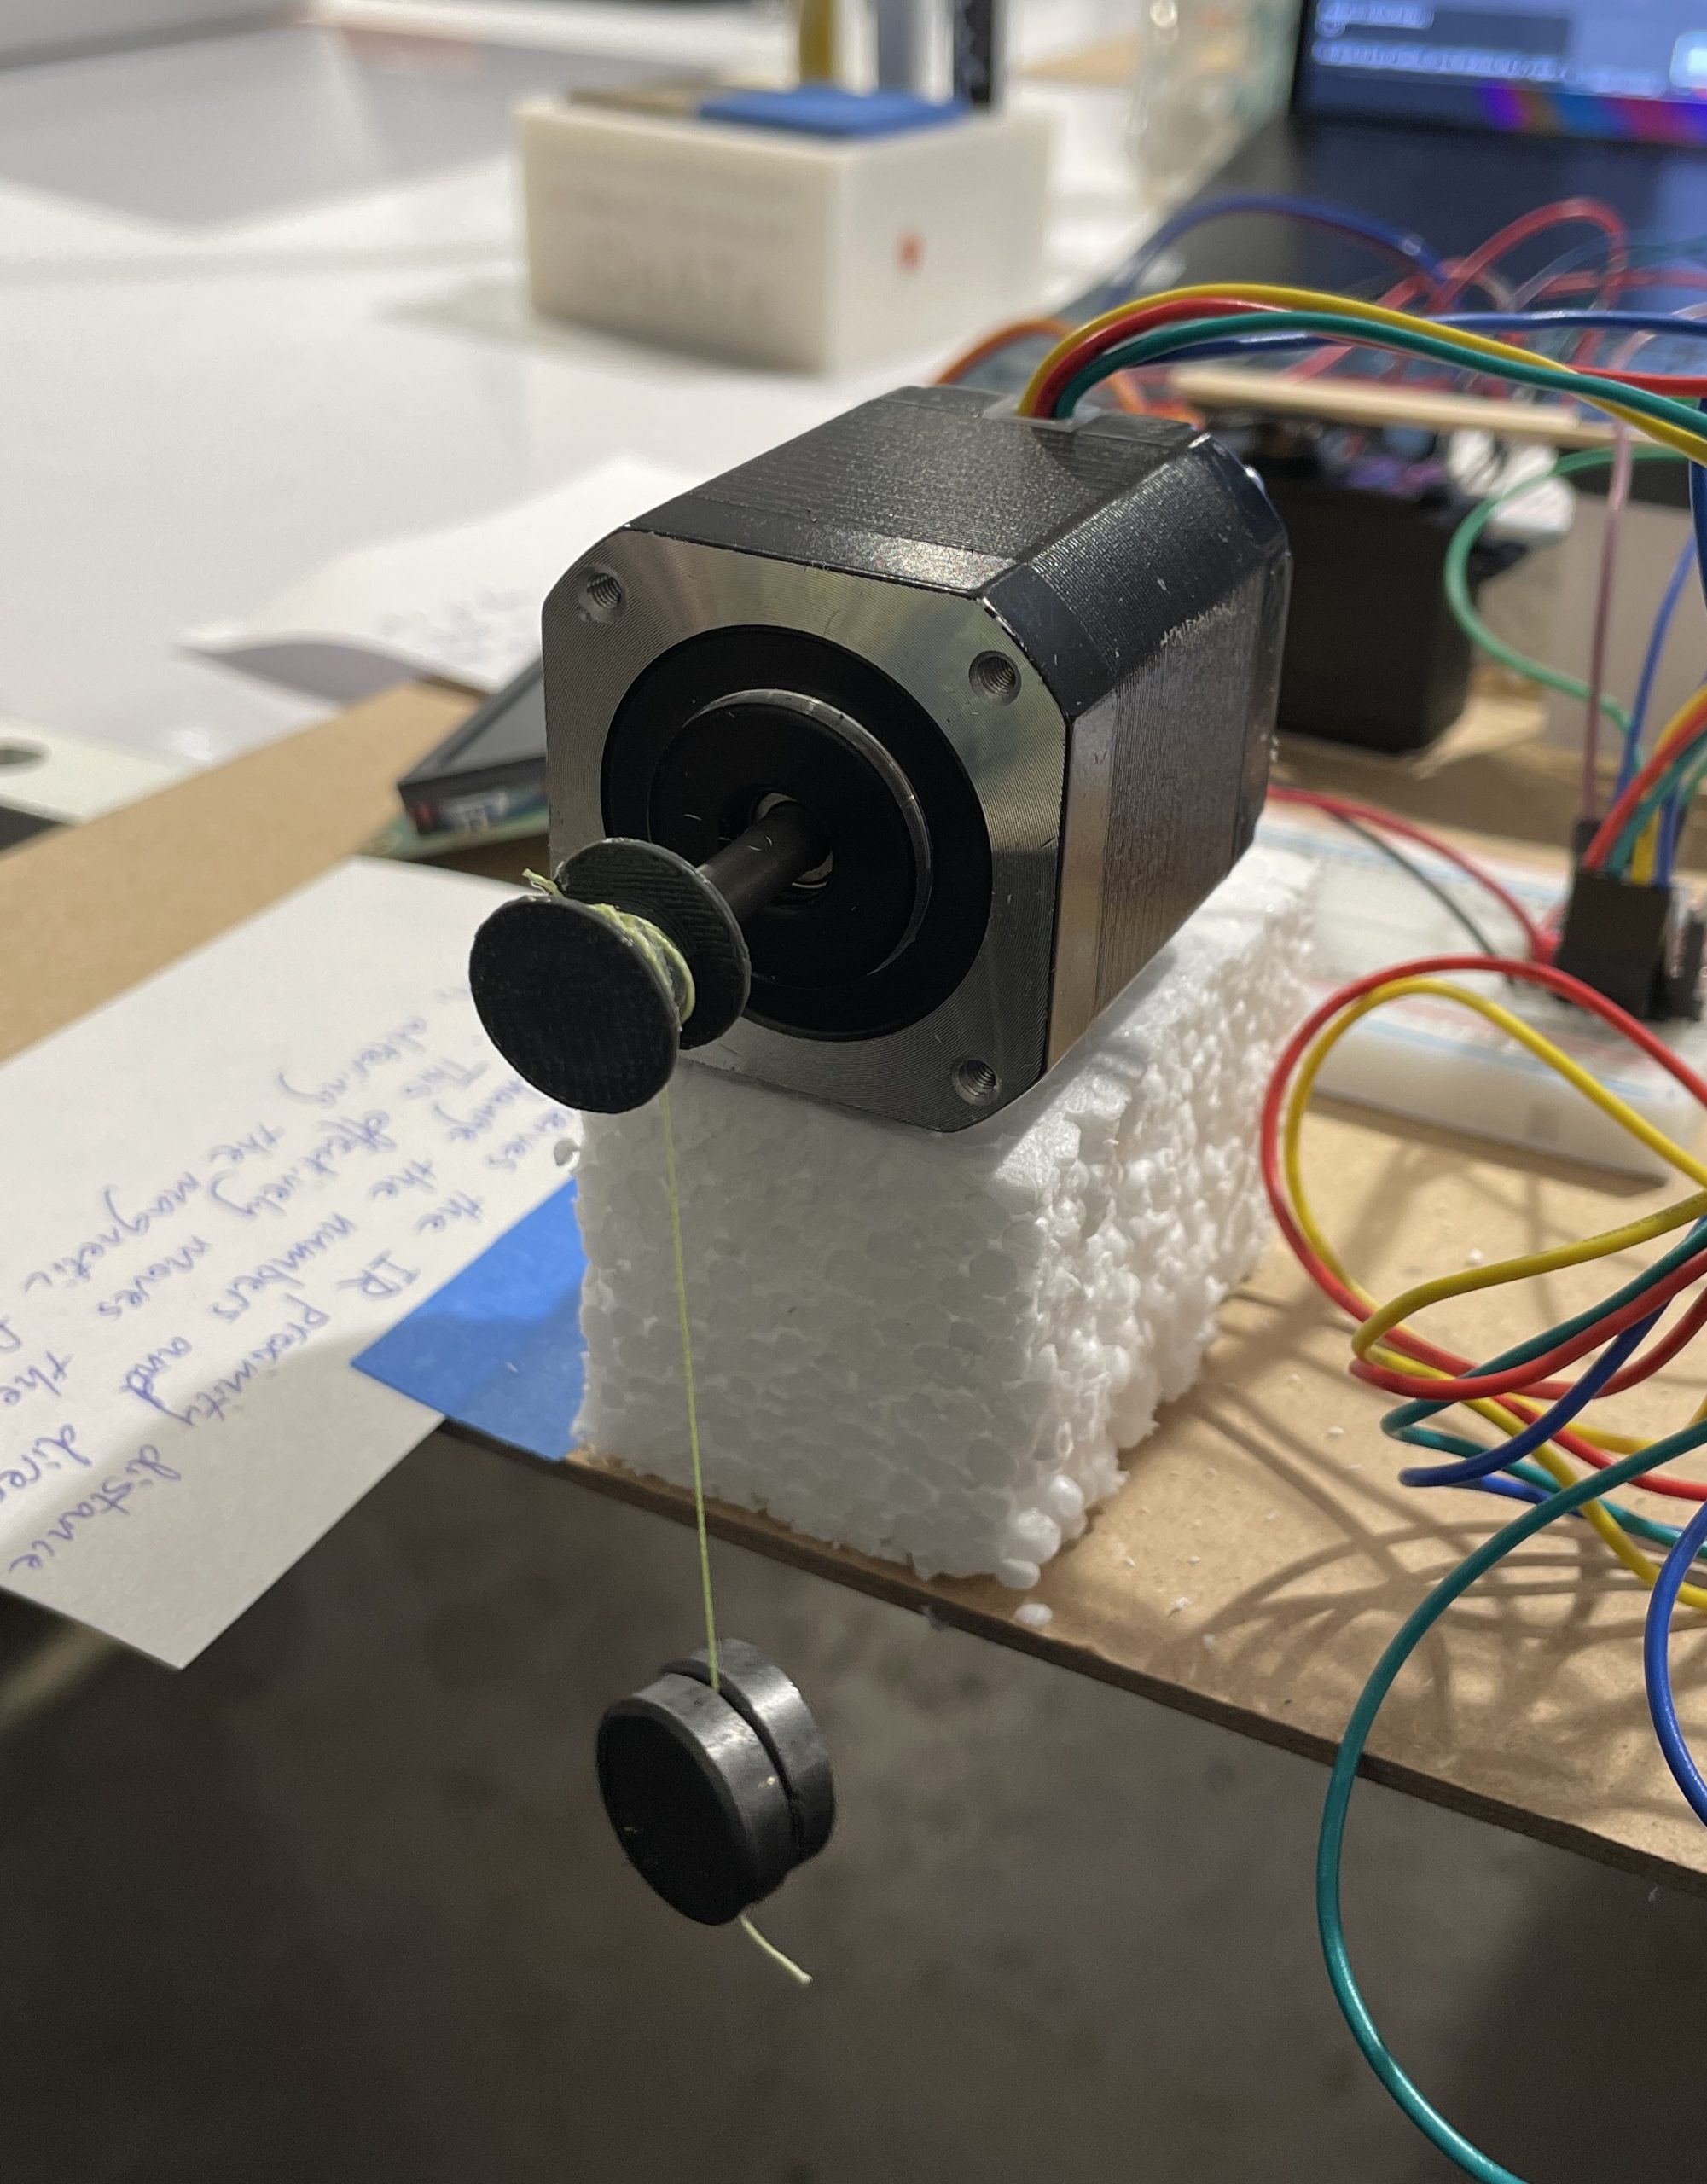 A 3D printed part for the stepper motor